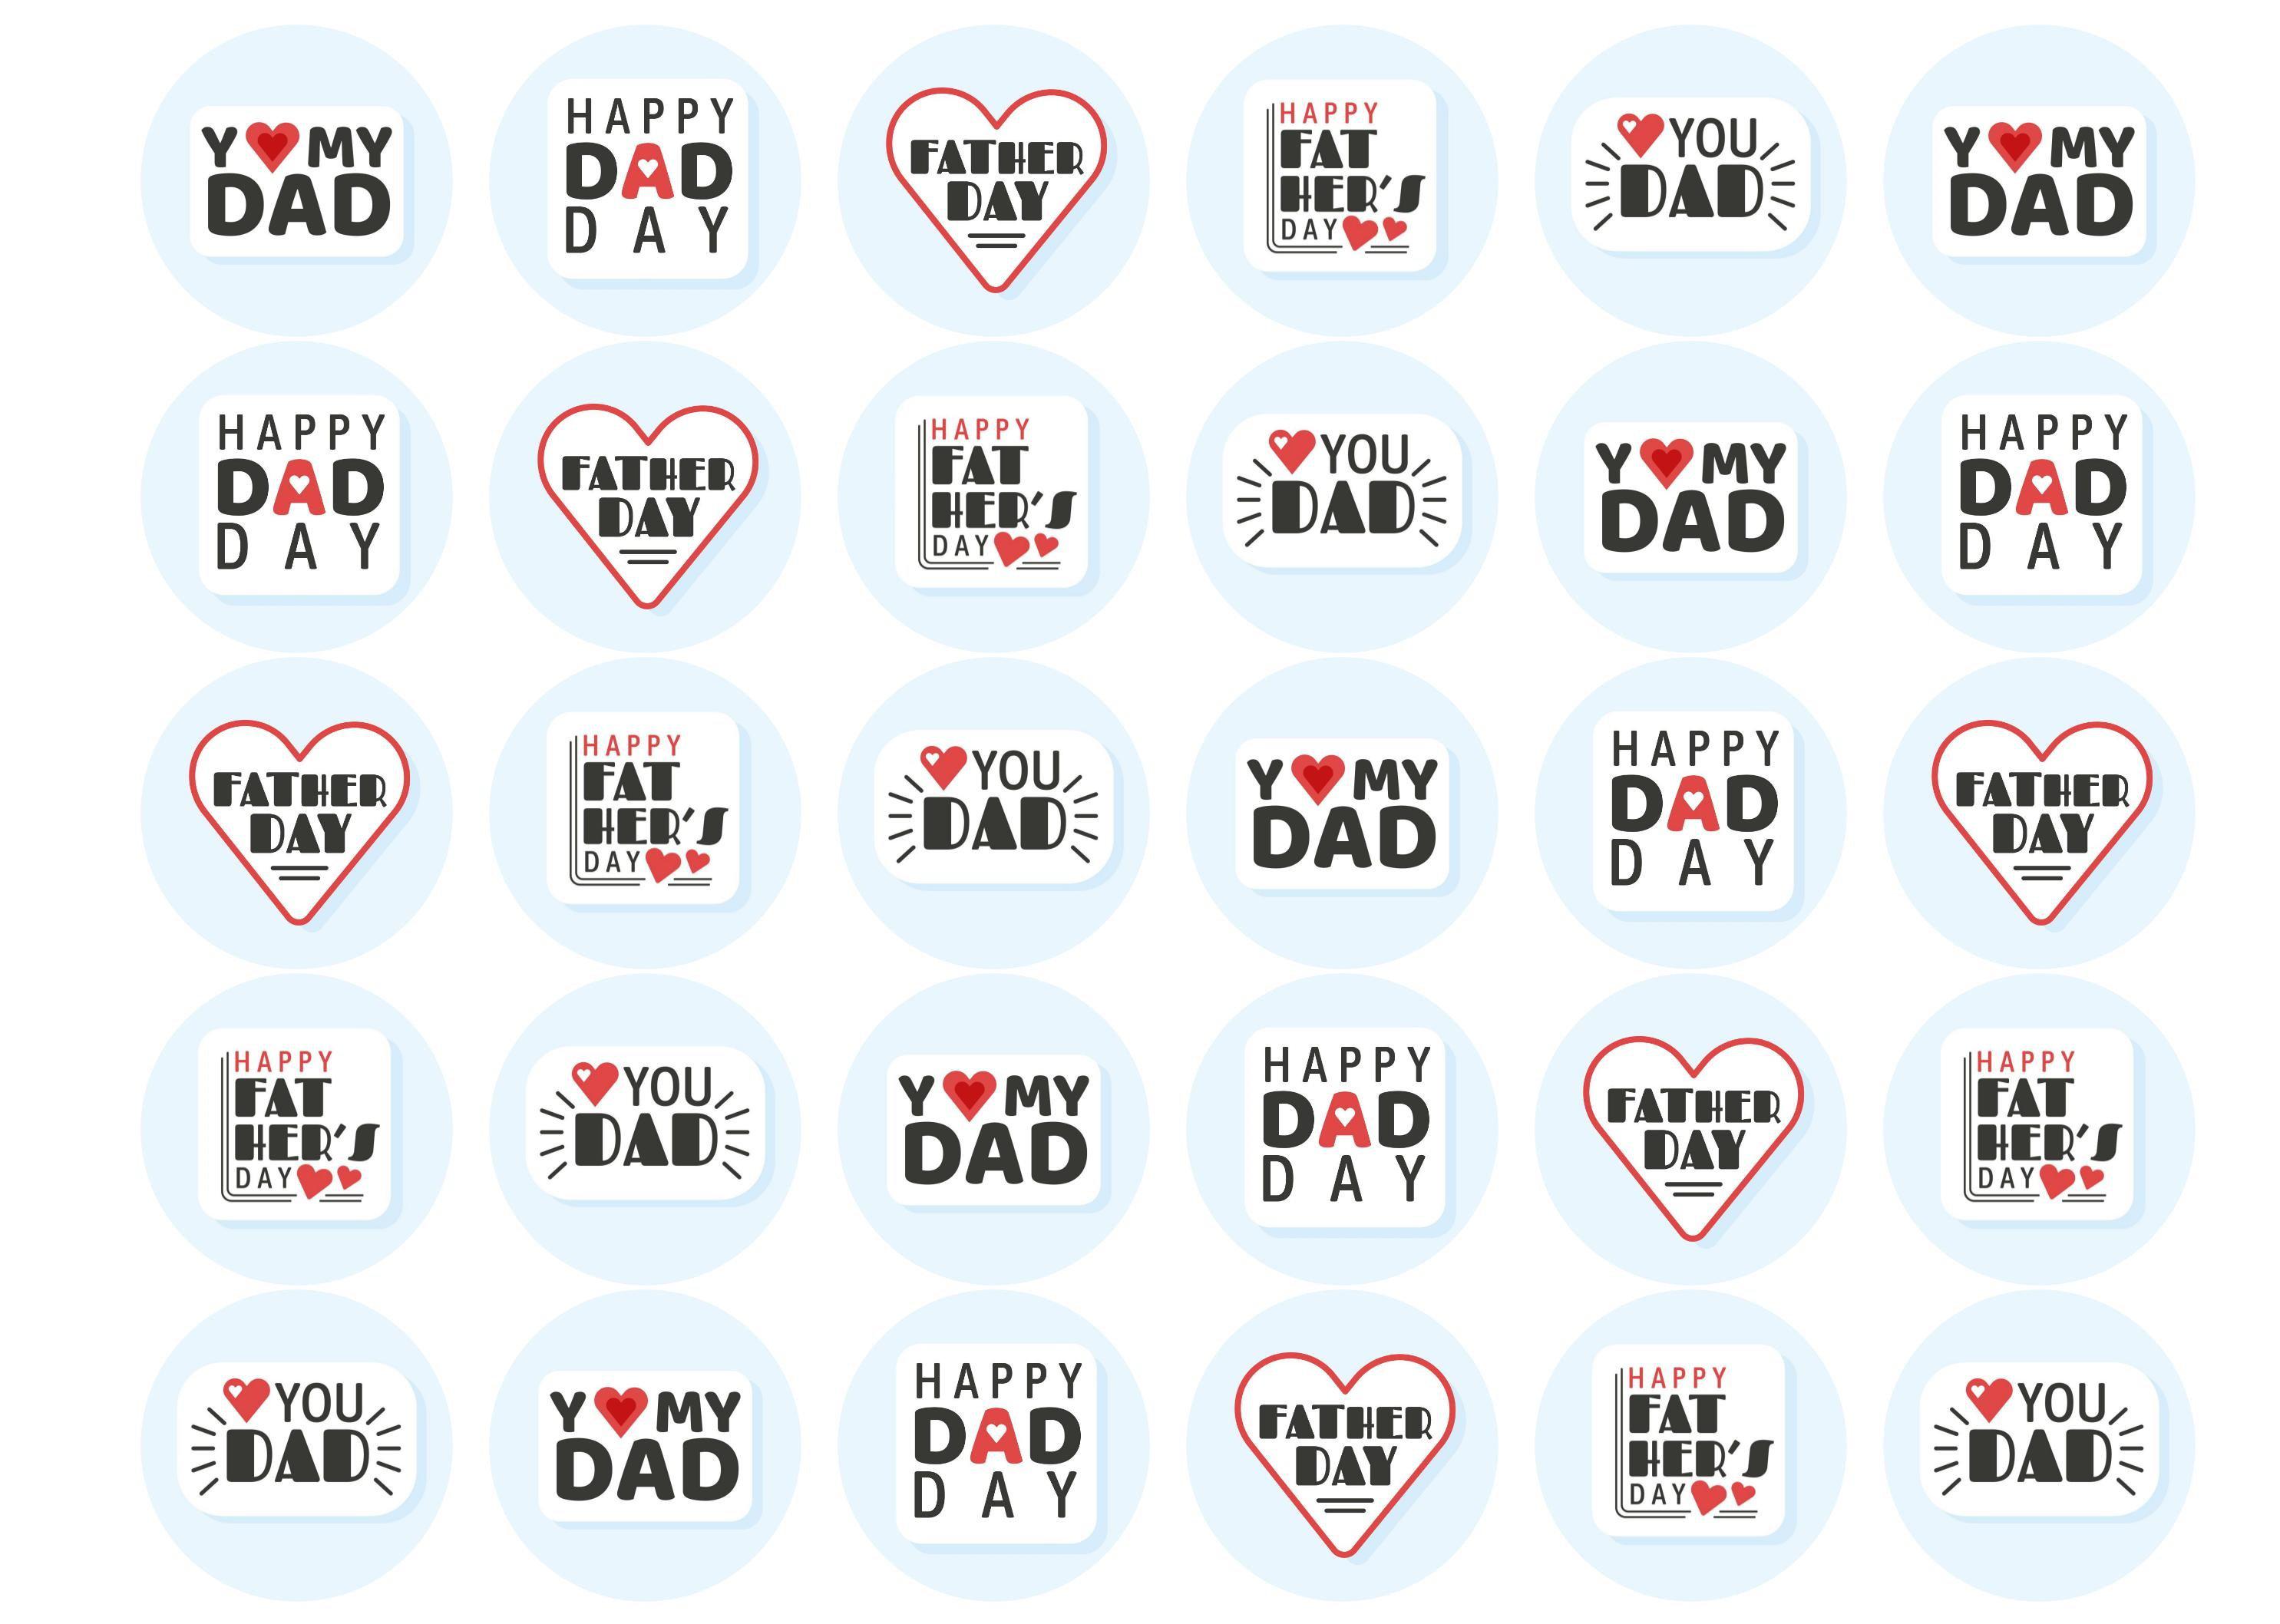 30 edible toppers with retro I heart dad designs